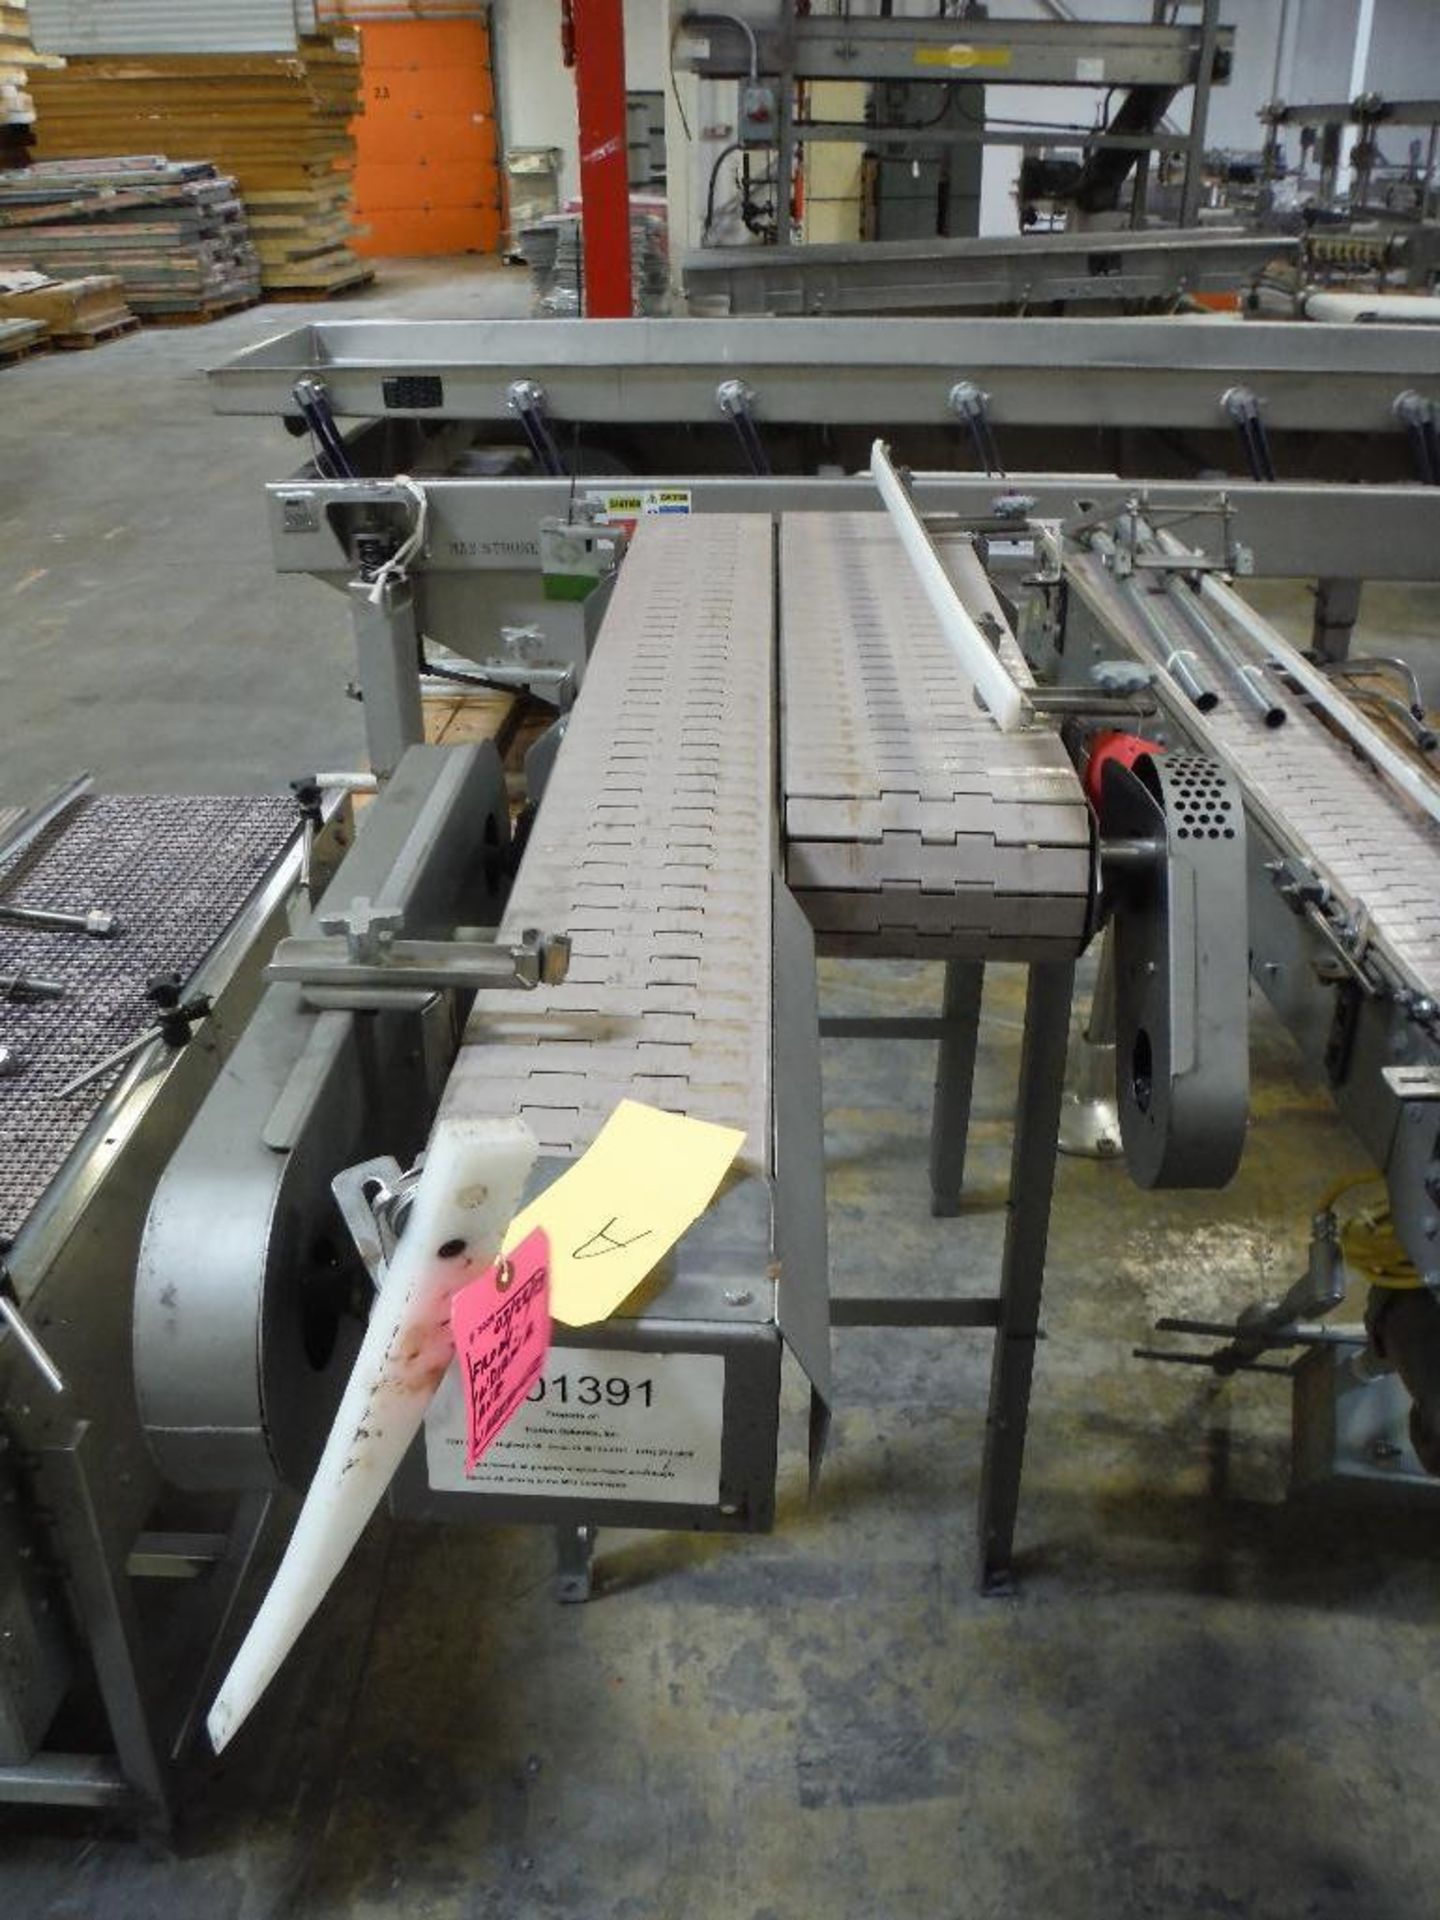 Nercon dual conveyor, table top belt, 64 in. long x overall 18 in. wide belts, missing motor and dri - Image 2 of 11